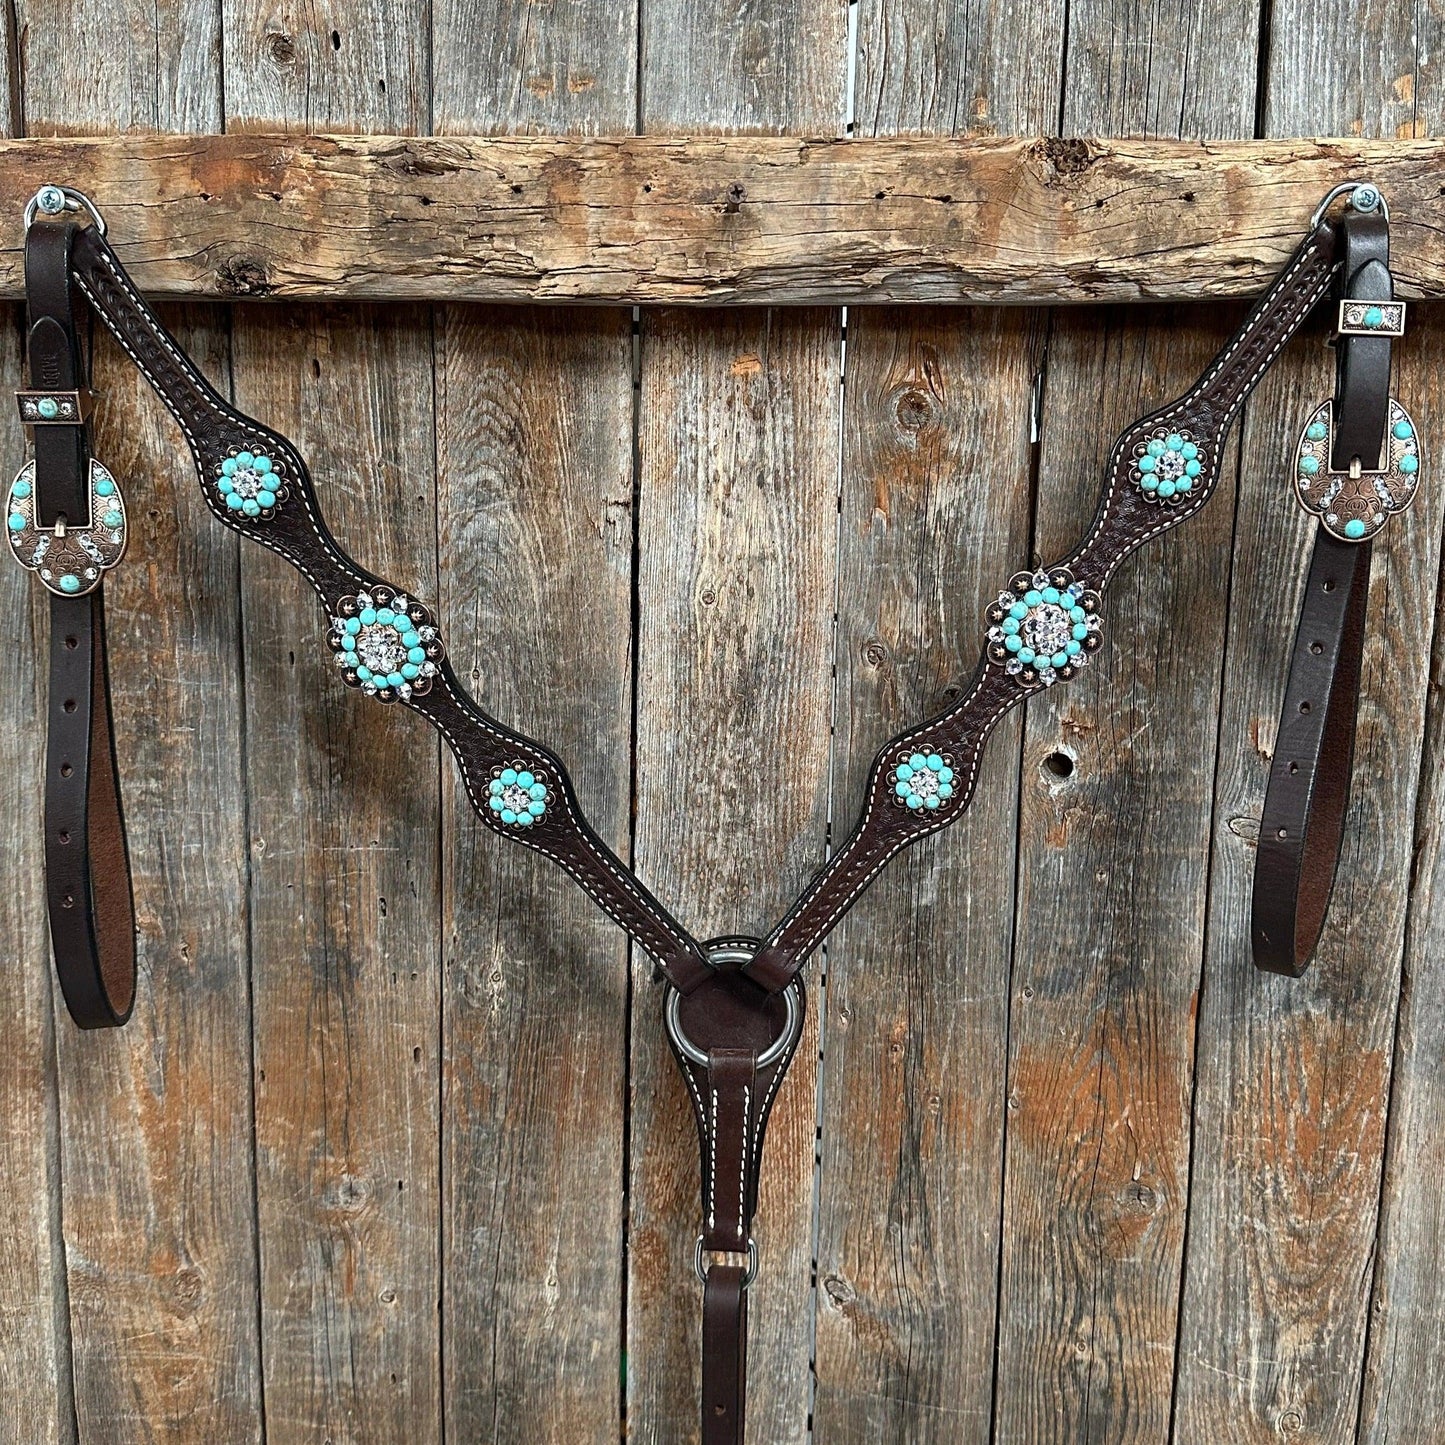 Dark Oil Basketweave Turquoise and Clear Browband/One Ear Tack Set #BBBC530 - RODEO DRIVE